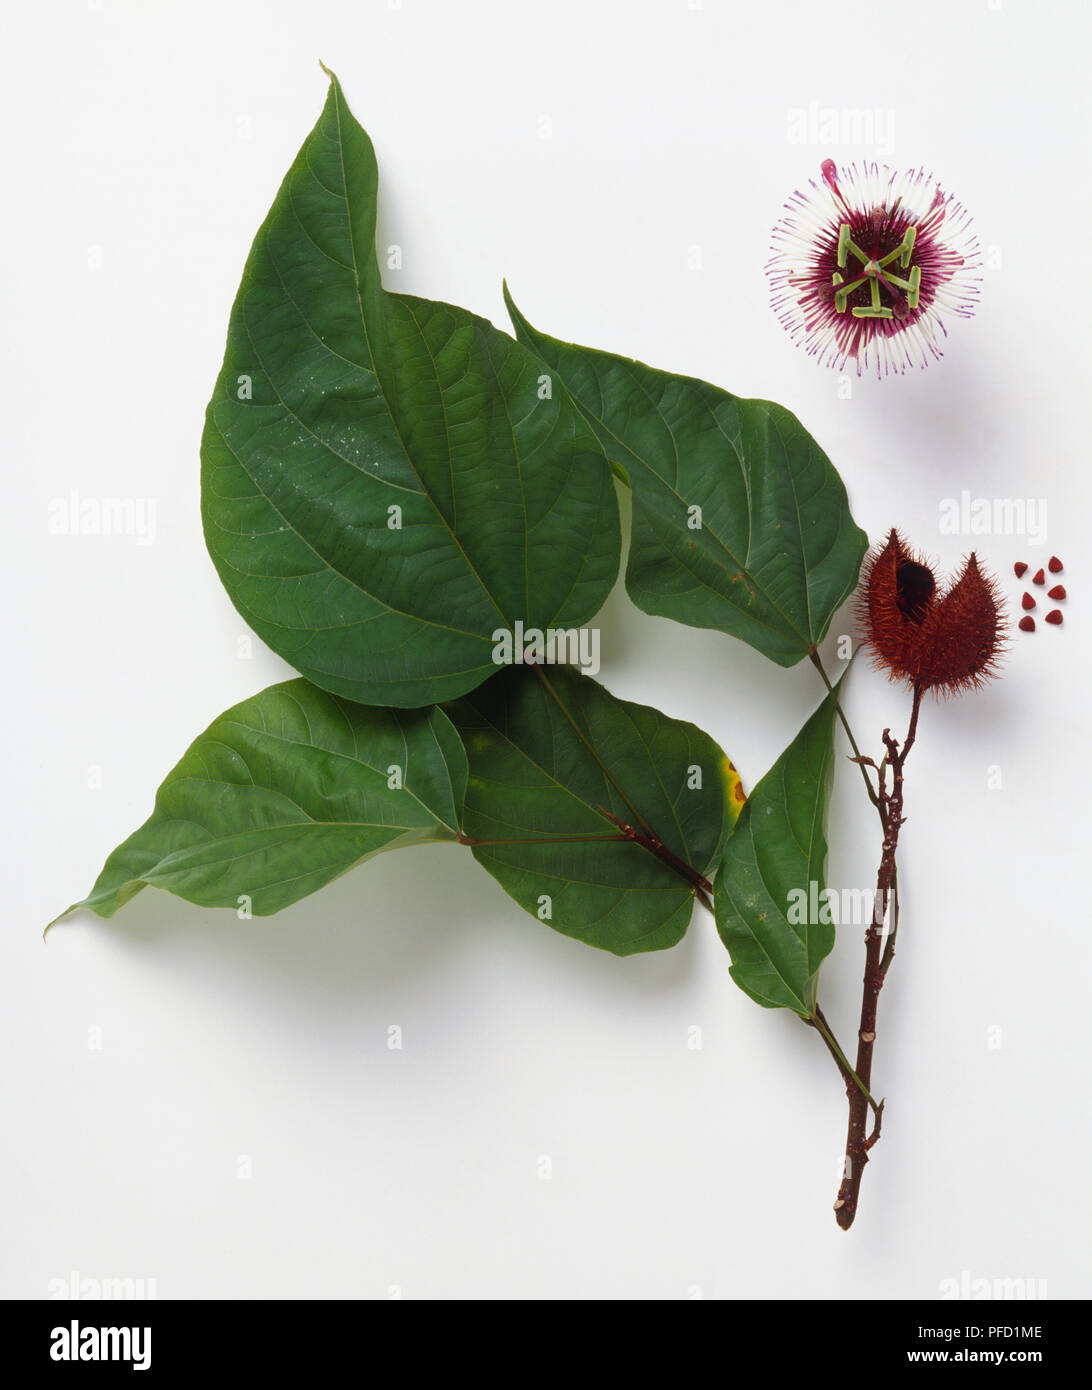 Bixa Orellana, Annatto, Orleansbaum stem with broad green cordate leaves, a spiny seed pod, a blossom and seeds. Stock Photo